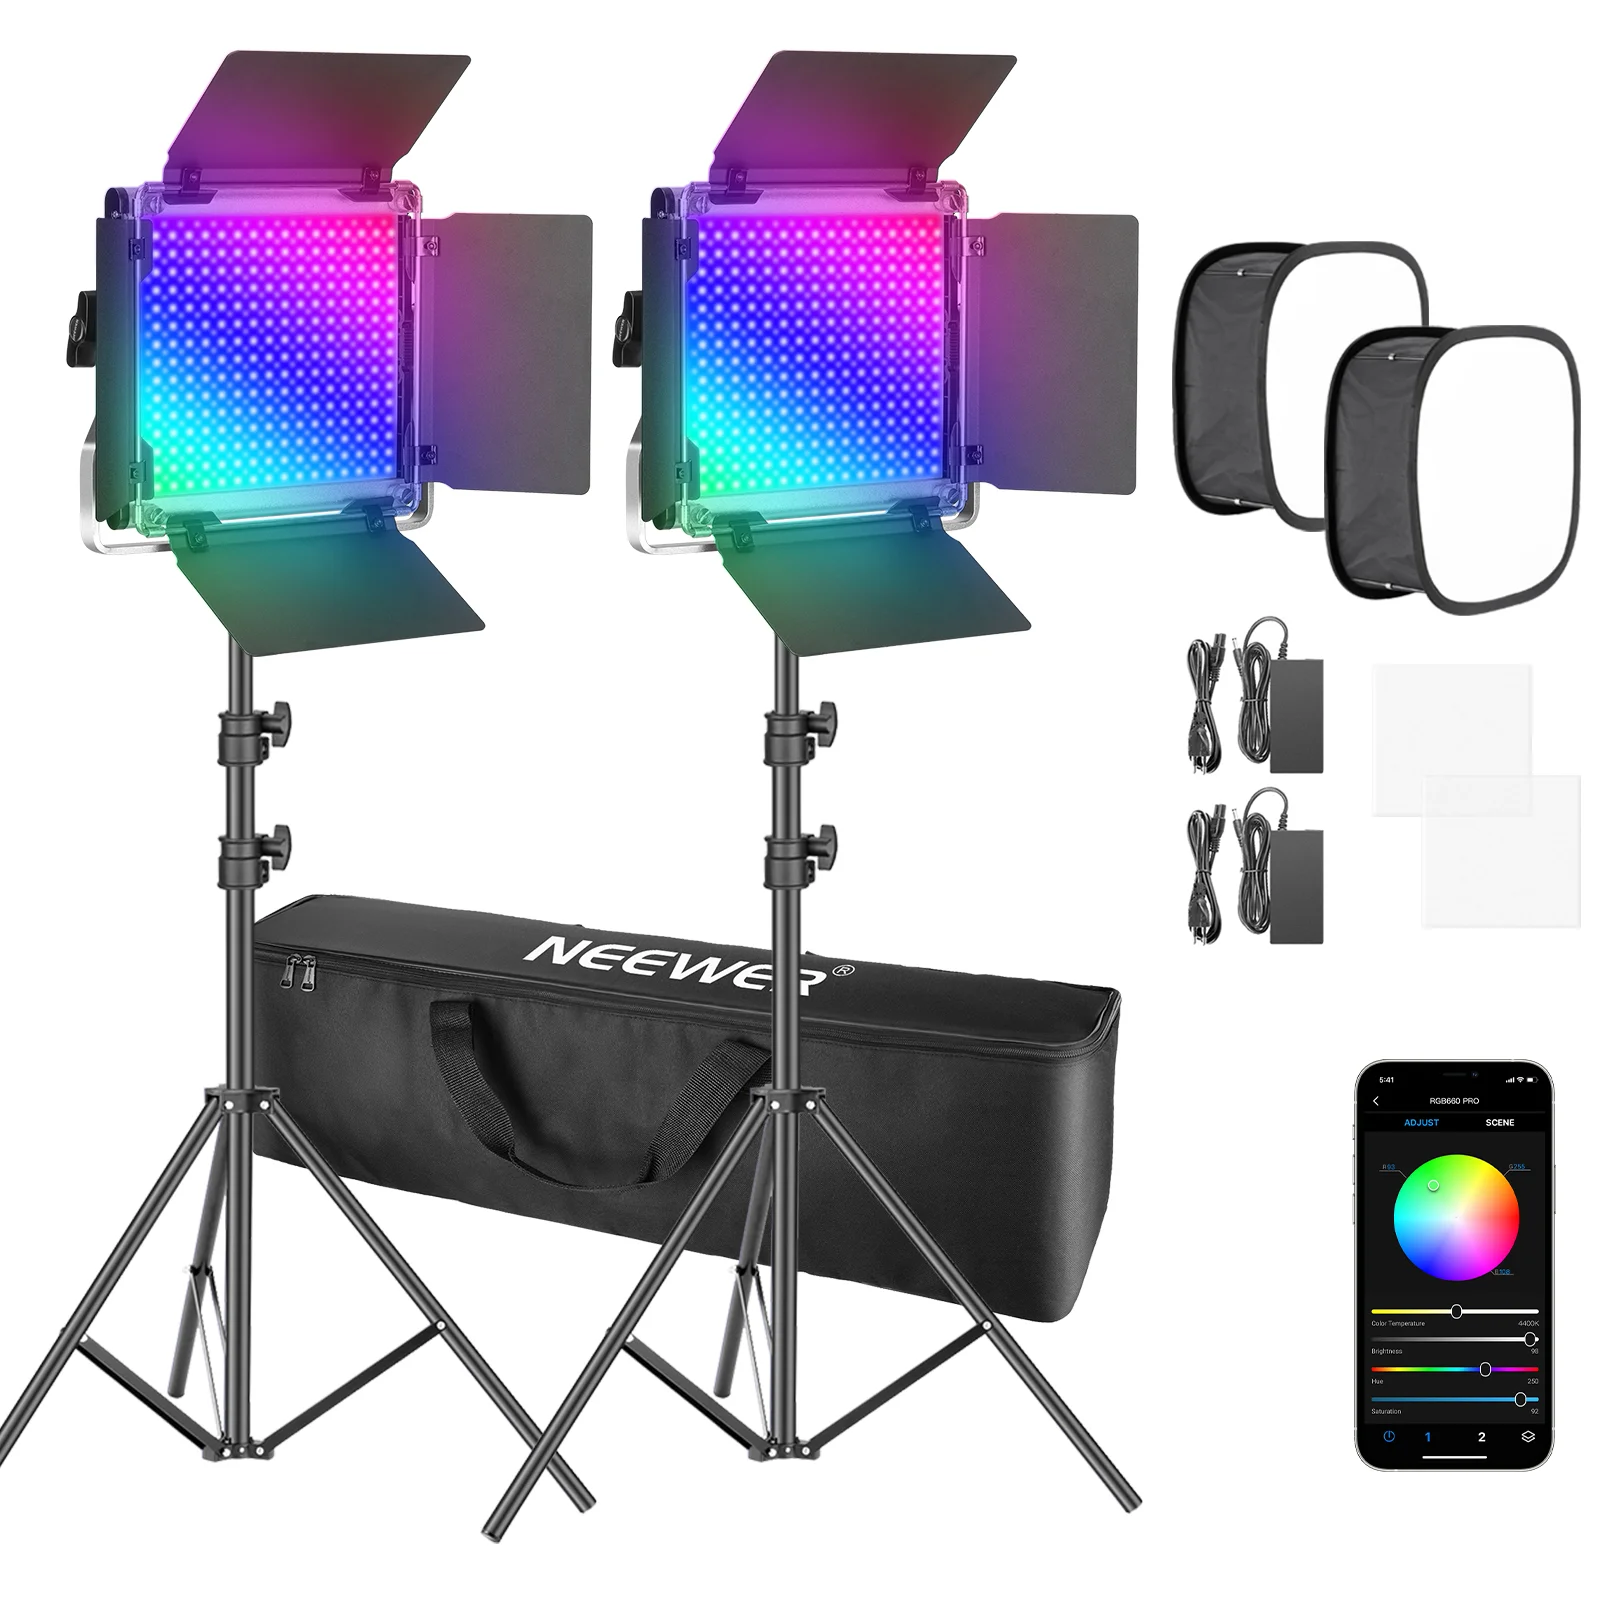 

Neewer 2 Packs 530/660 Pro Led Light With APP Control Photography Video Lighting Kit With Stands, Softbox, Dimmable 660 SMD LEDs